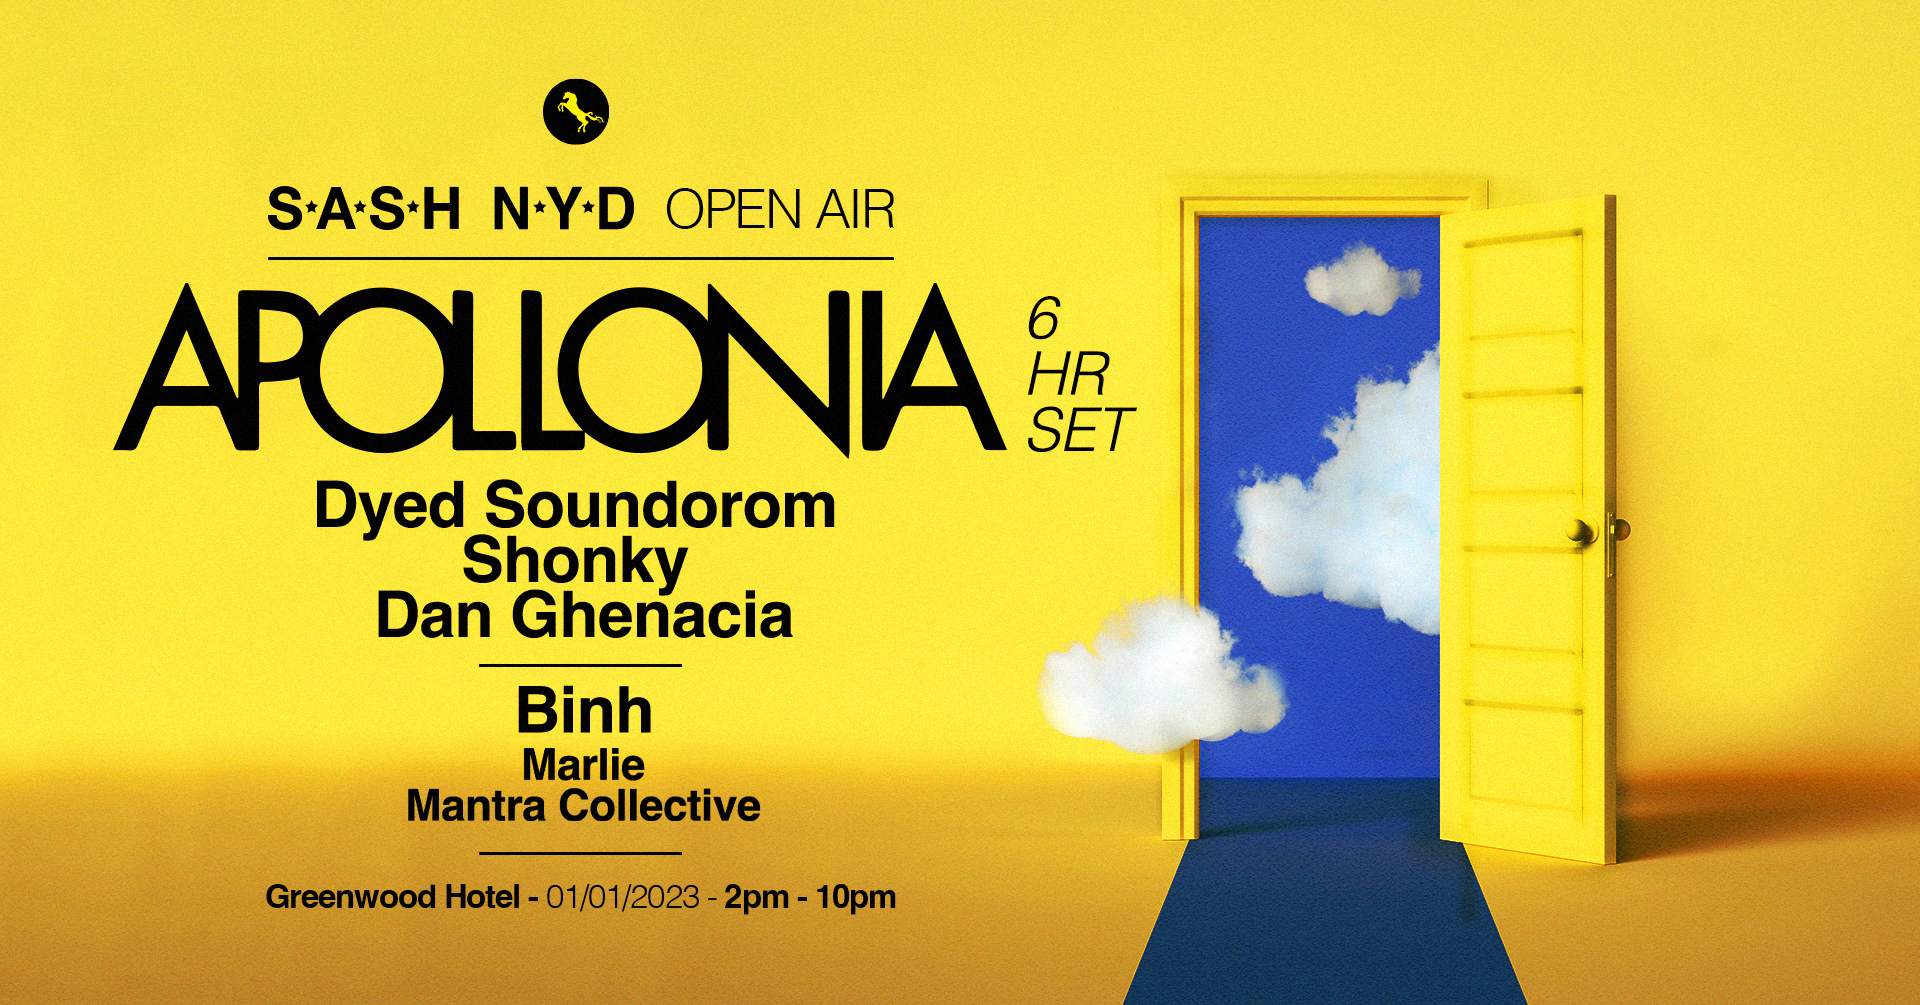 ★ S.A.S.H NYD OPEN AIR 2023 ★ Apollonia ★ 6 Hour Set ★ Binh ★ - フライヤー表